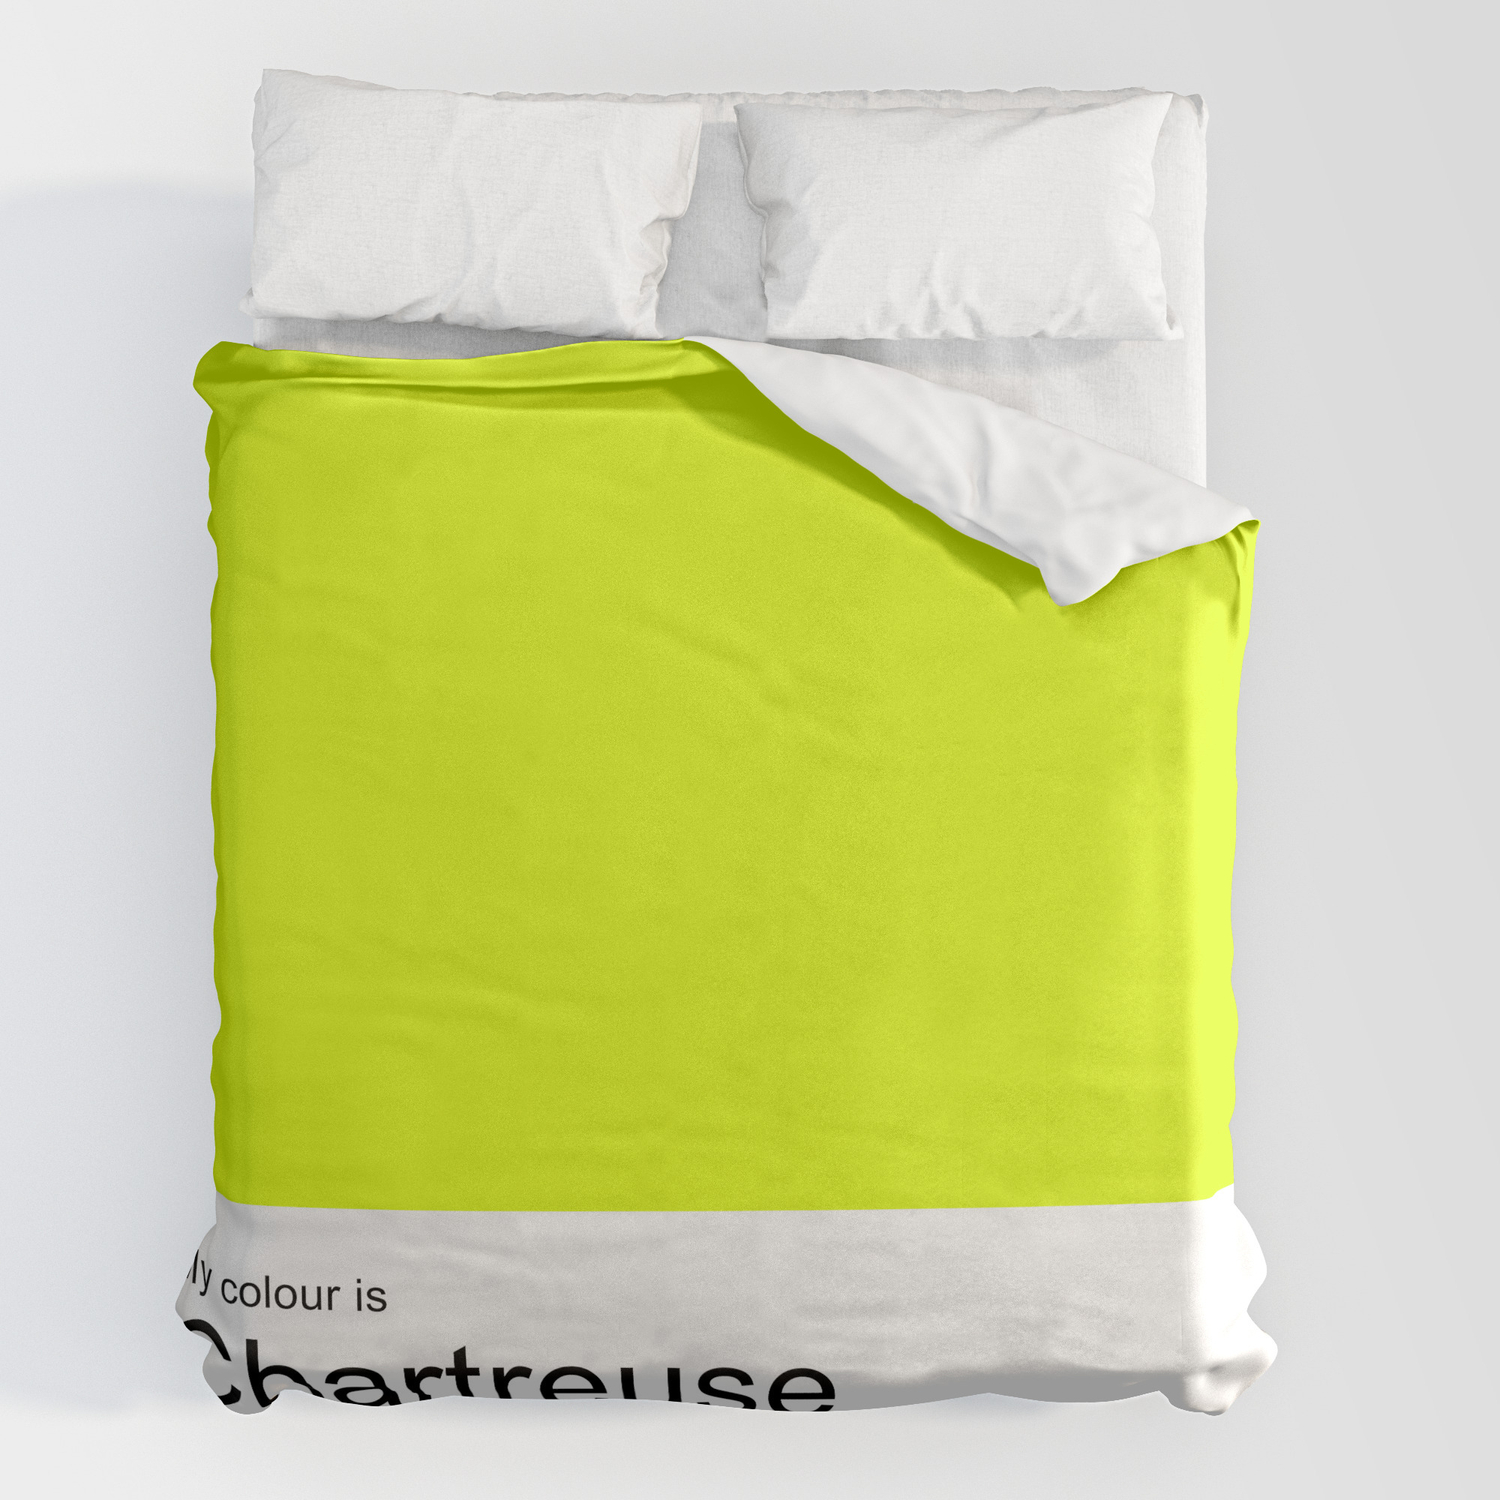 My Colour Is Chartreuse Duvet Cover By, Chartreuse Duvet Cover